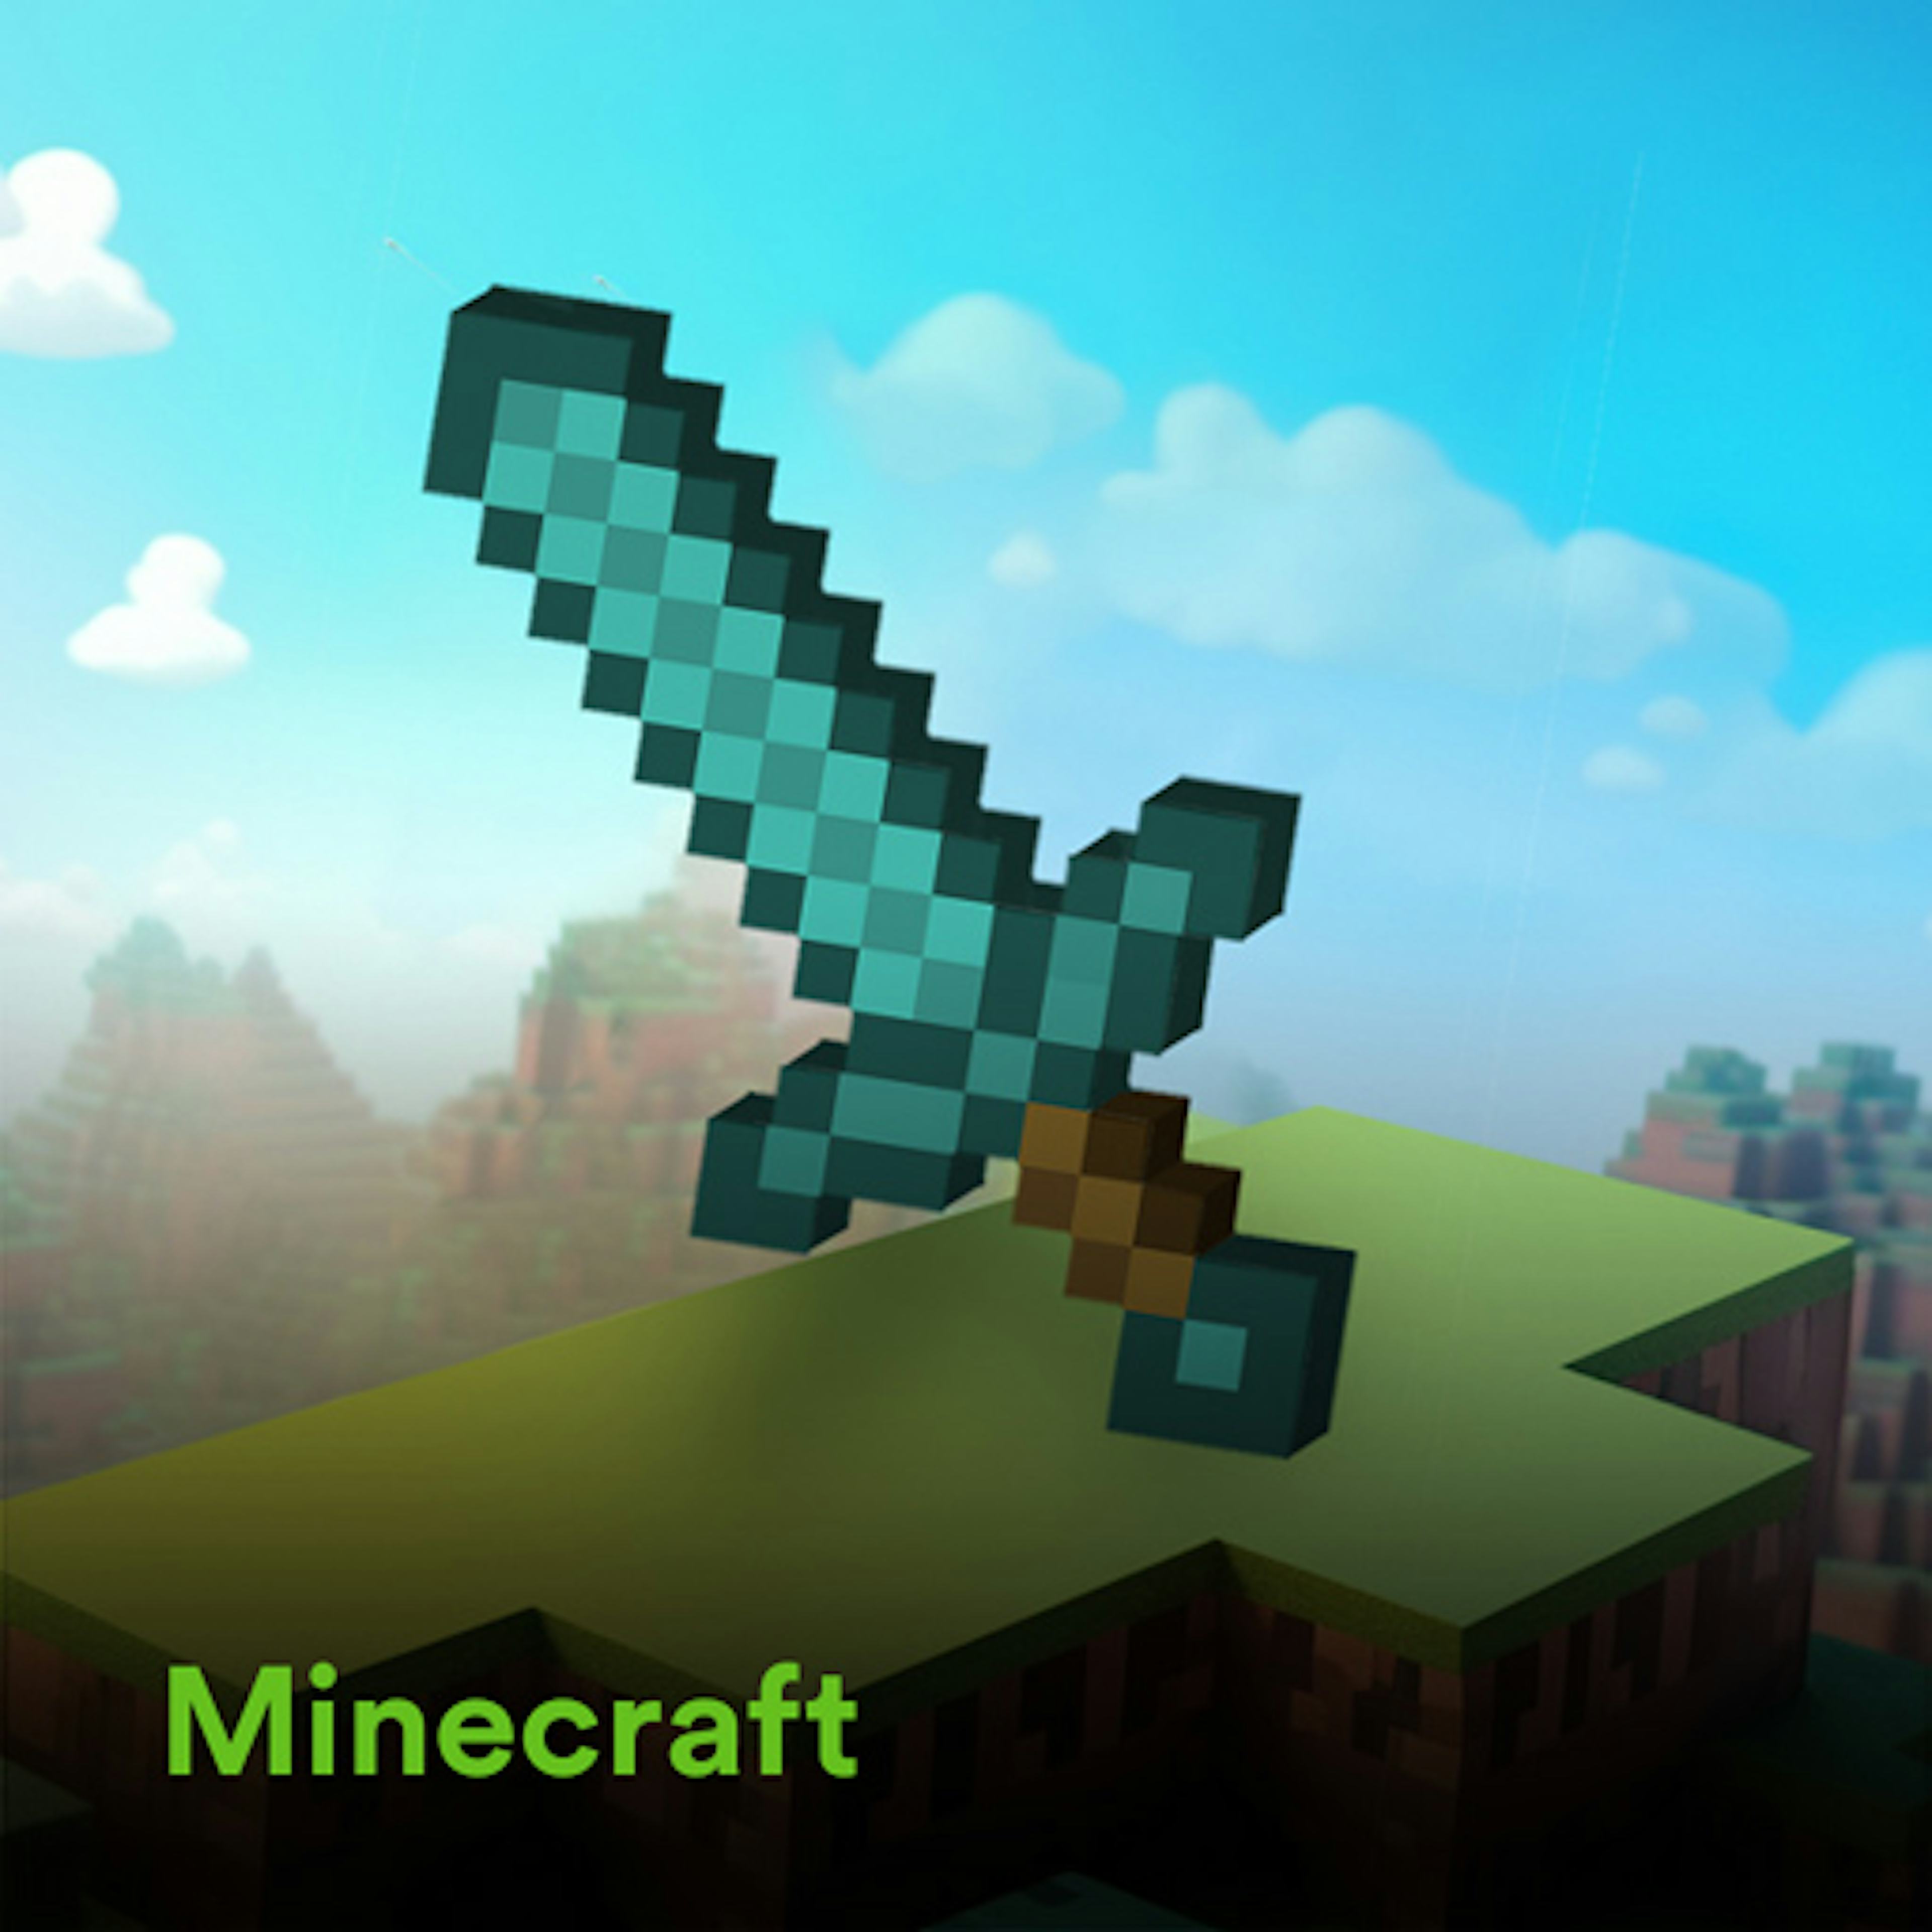 Free to Use MINECRAFT Gameplay (No Copyright Royalty Free) 